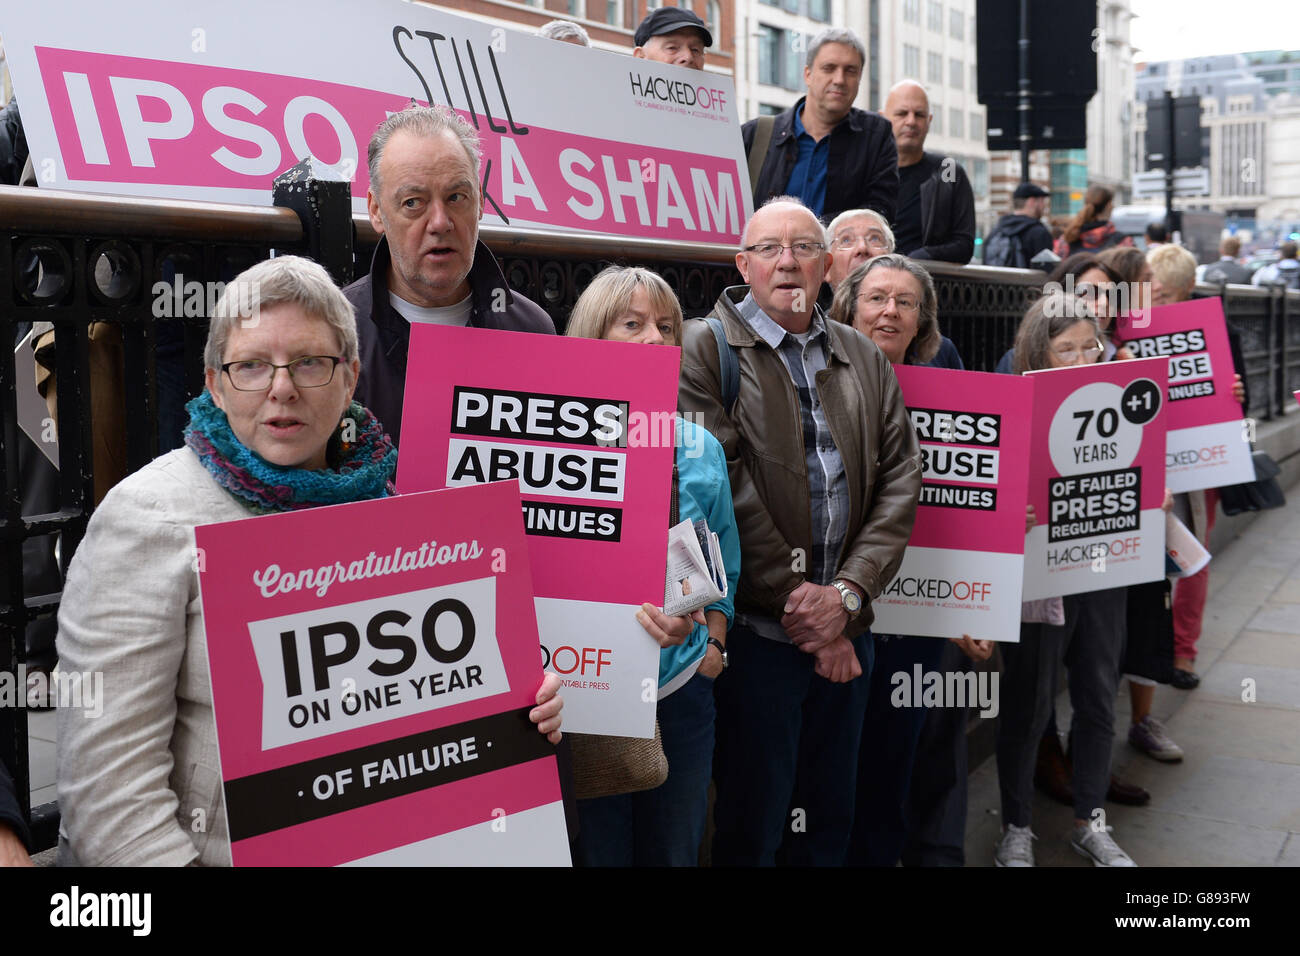 Hacked Off campaigners hold banners in a protest about the lack of effectiveness of the regulator Independent Press Standards Organisation (IPSO) a year after it was formed, outside their offices in London. Stock Photo